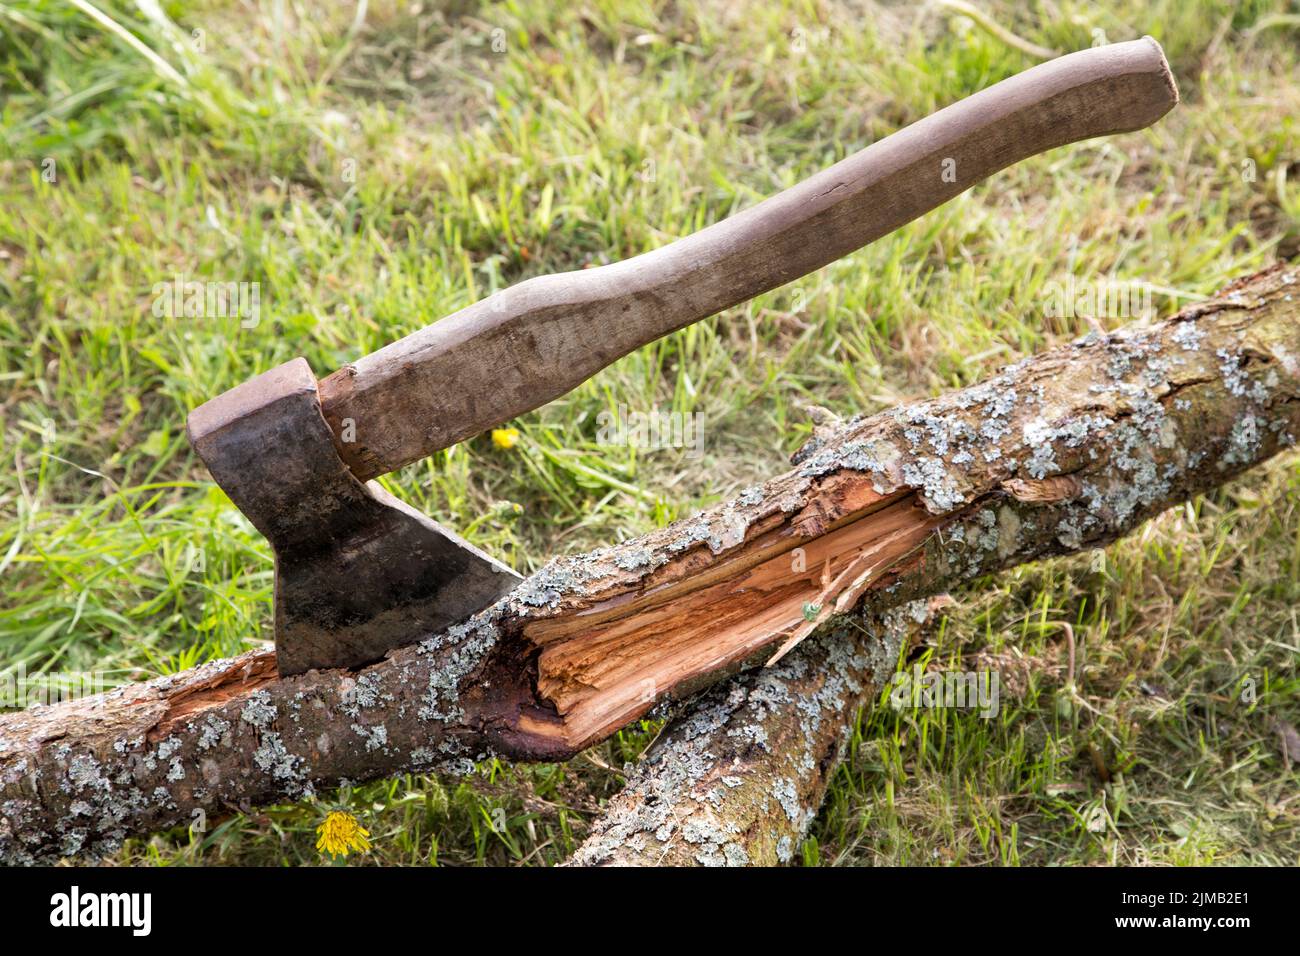 The old ax is stuck in a tree against a grass background Stock Photo